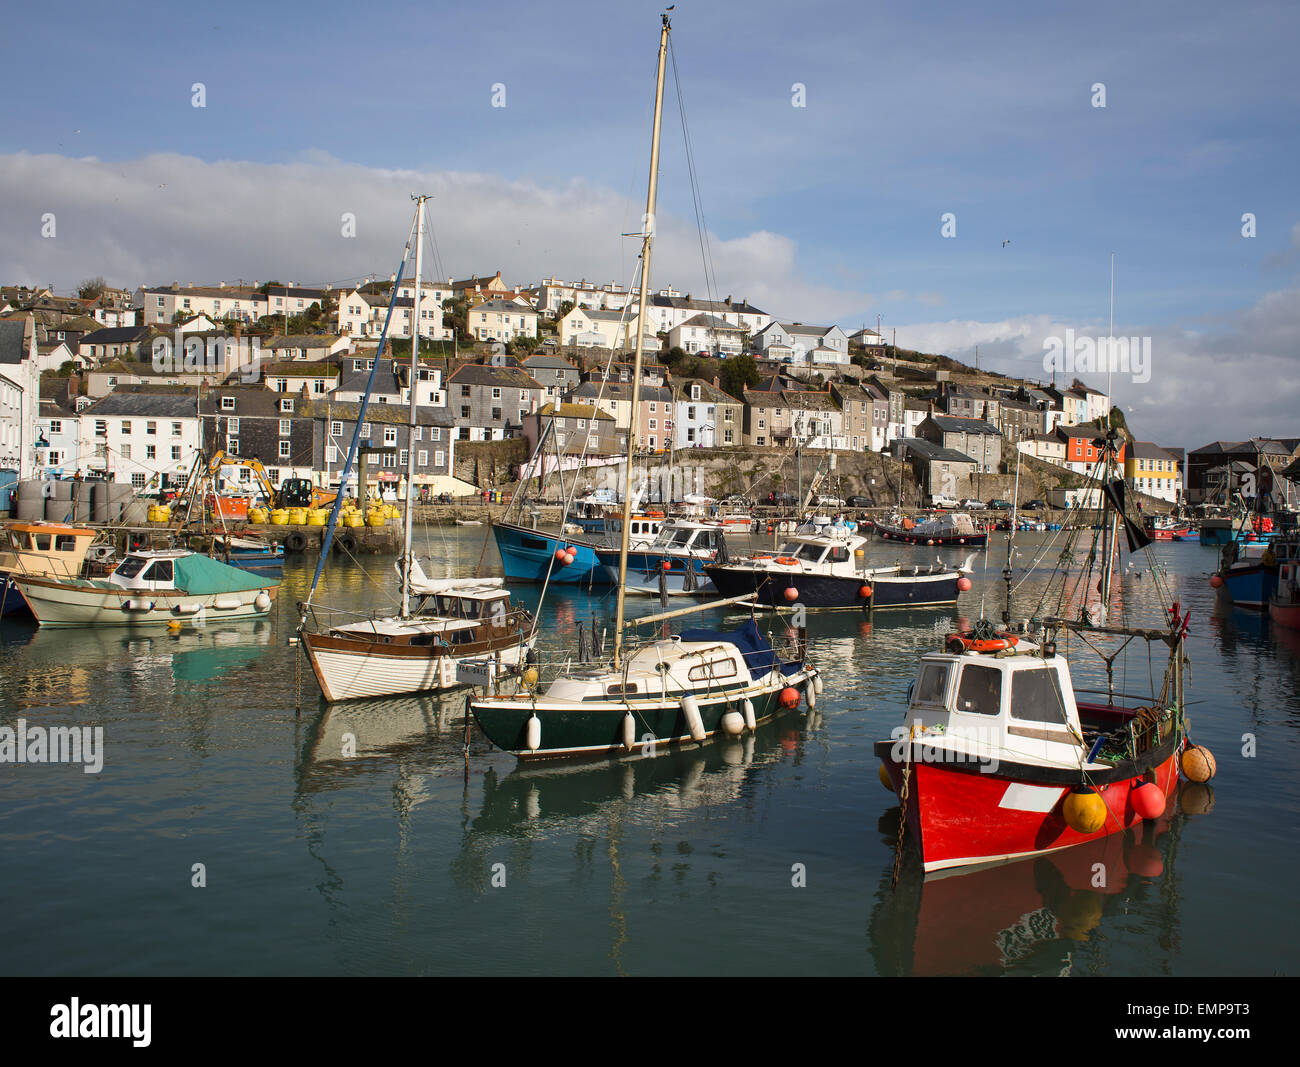 Colorful boats and houses of Mevagissey, town and harbour, Cornwall, England, UK. Stock Photo